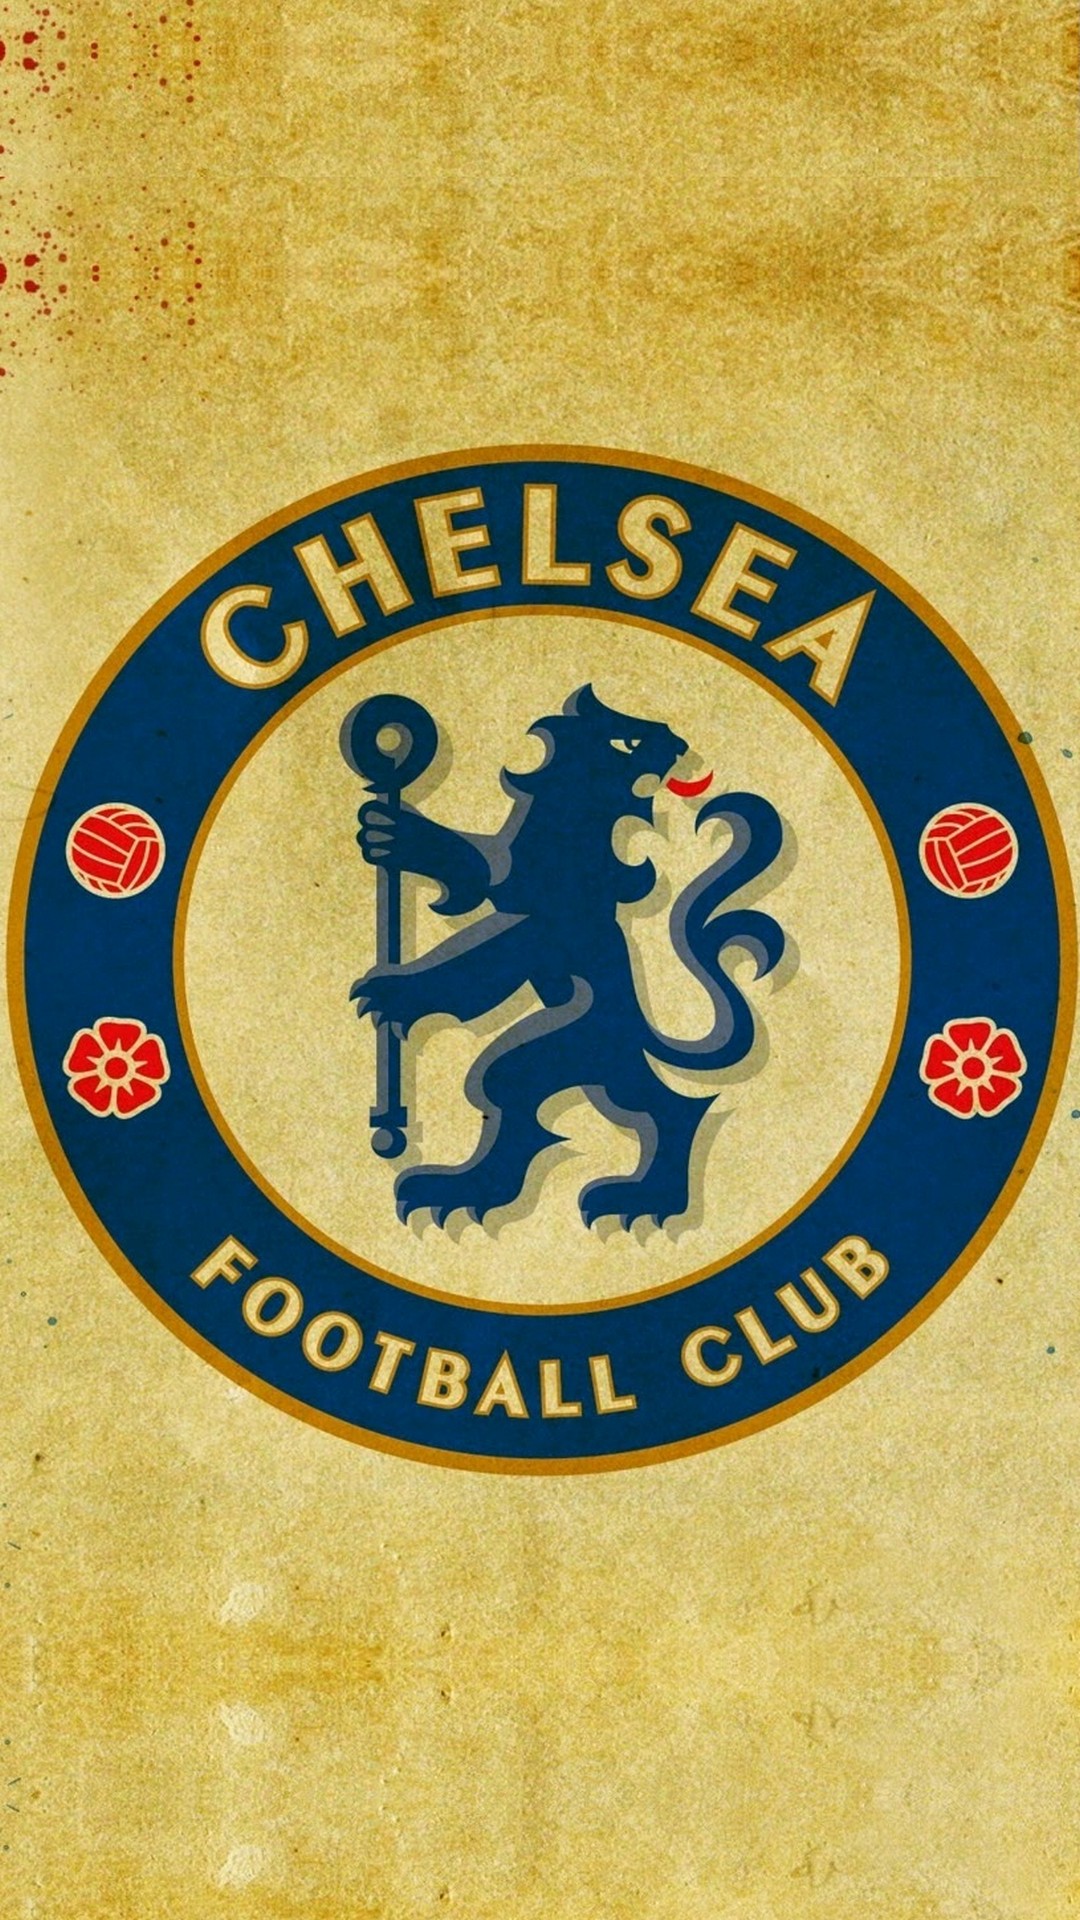 Chelsea Champions League iPhone Wallpapers With Resolution 1080X1920 pixel. You can make this wallpaper for your Mac or Windows Desktop Background, iPhone, Android or Tablet and another Smartphone device for free